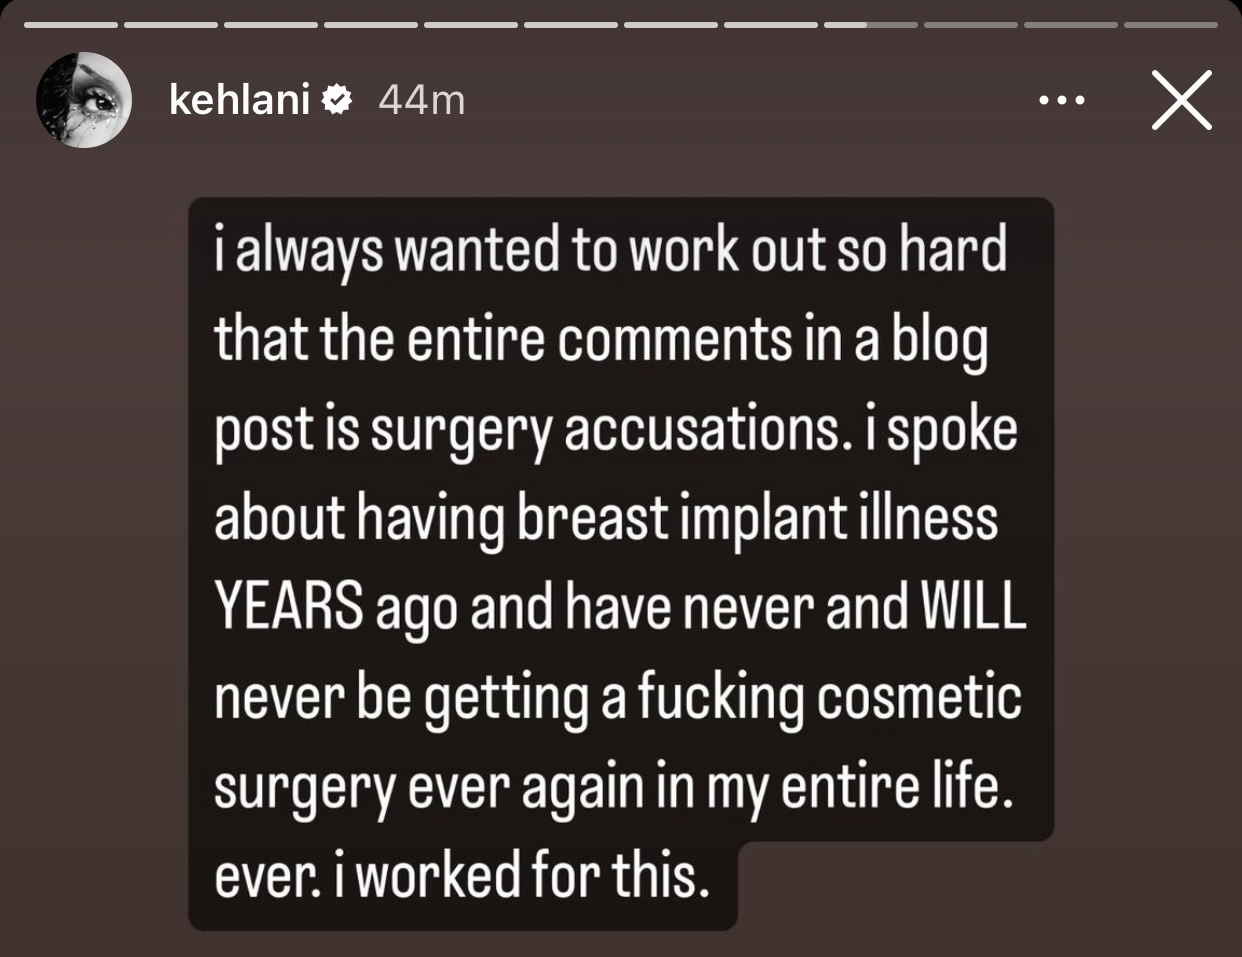 Kehlani&#x27;s Instagram story expressing her decision against cosmetic surgery and pride in her natural body after past experiences